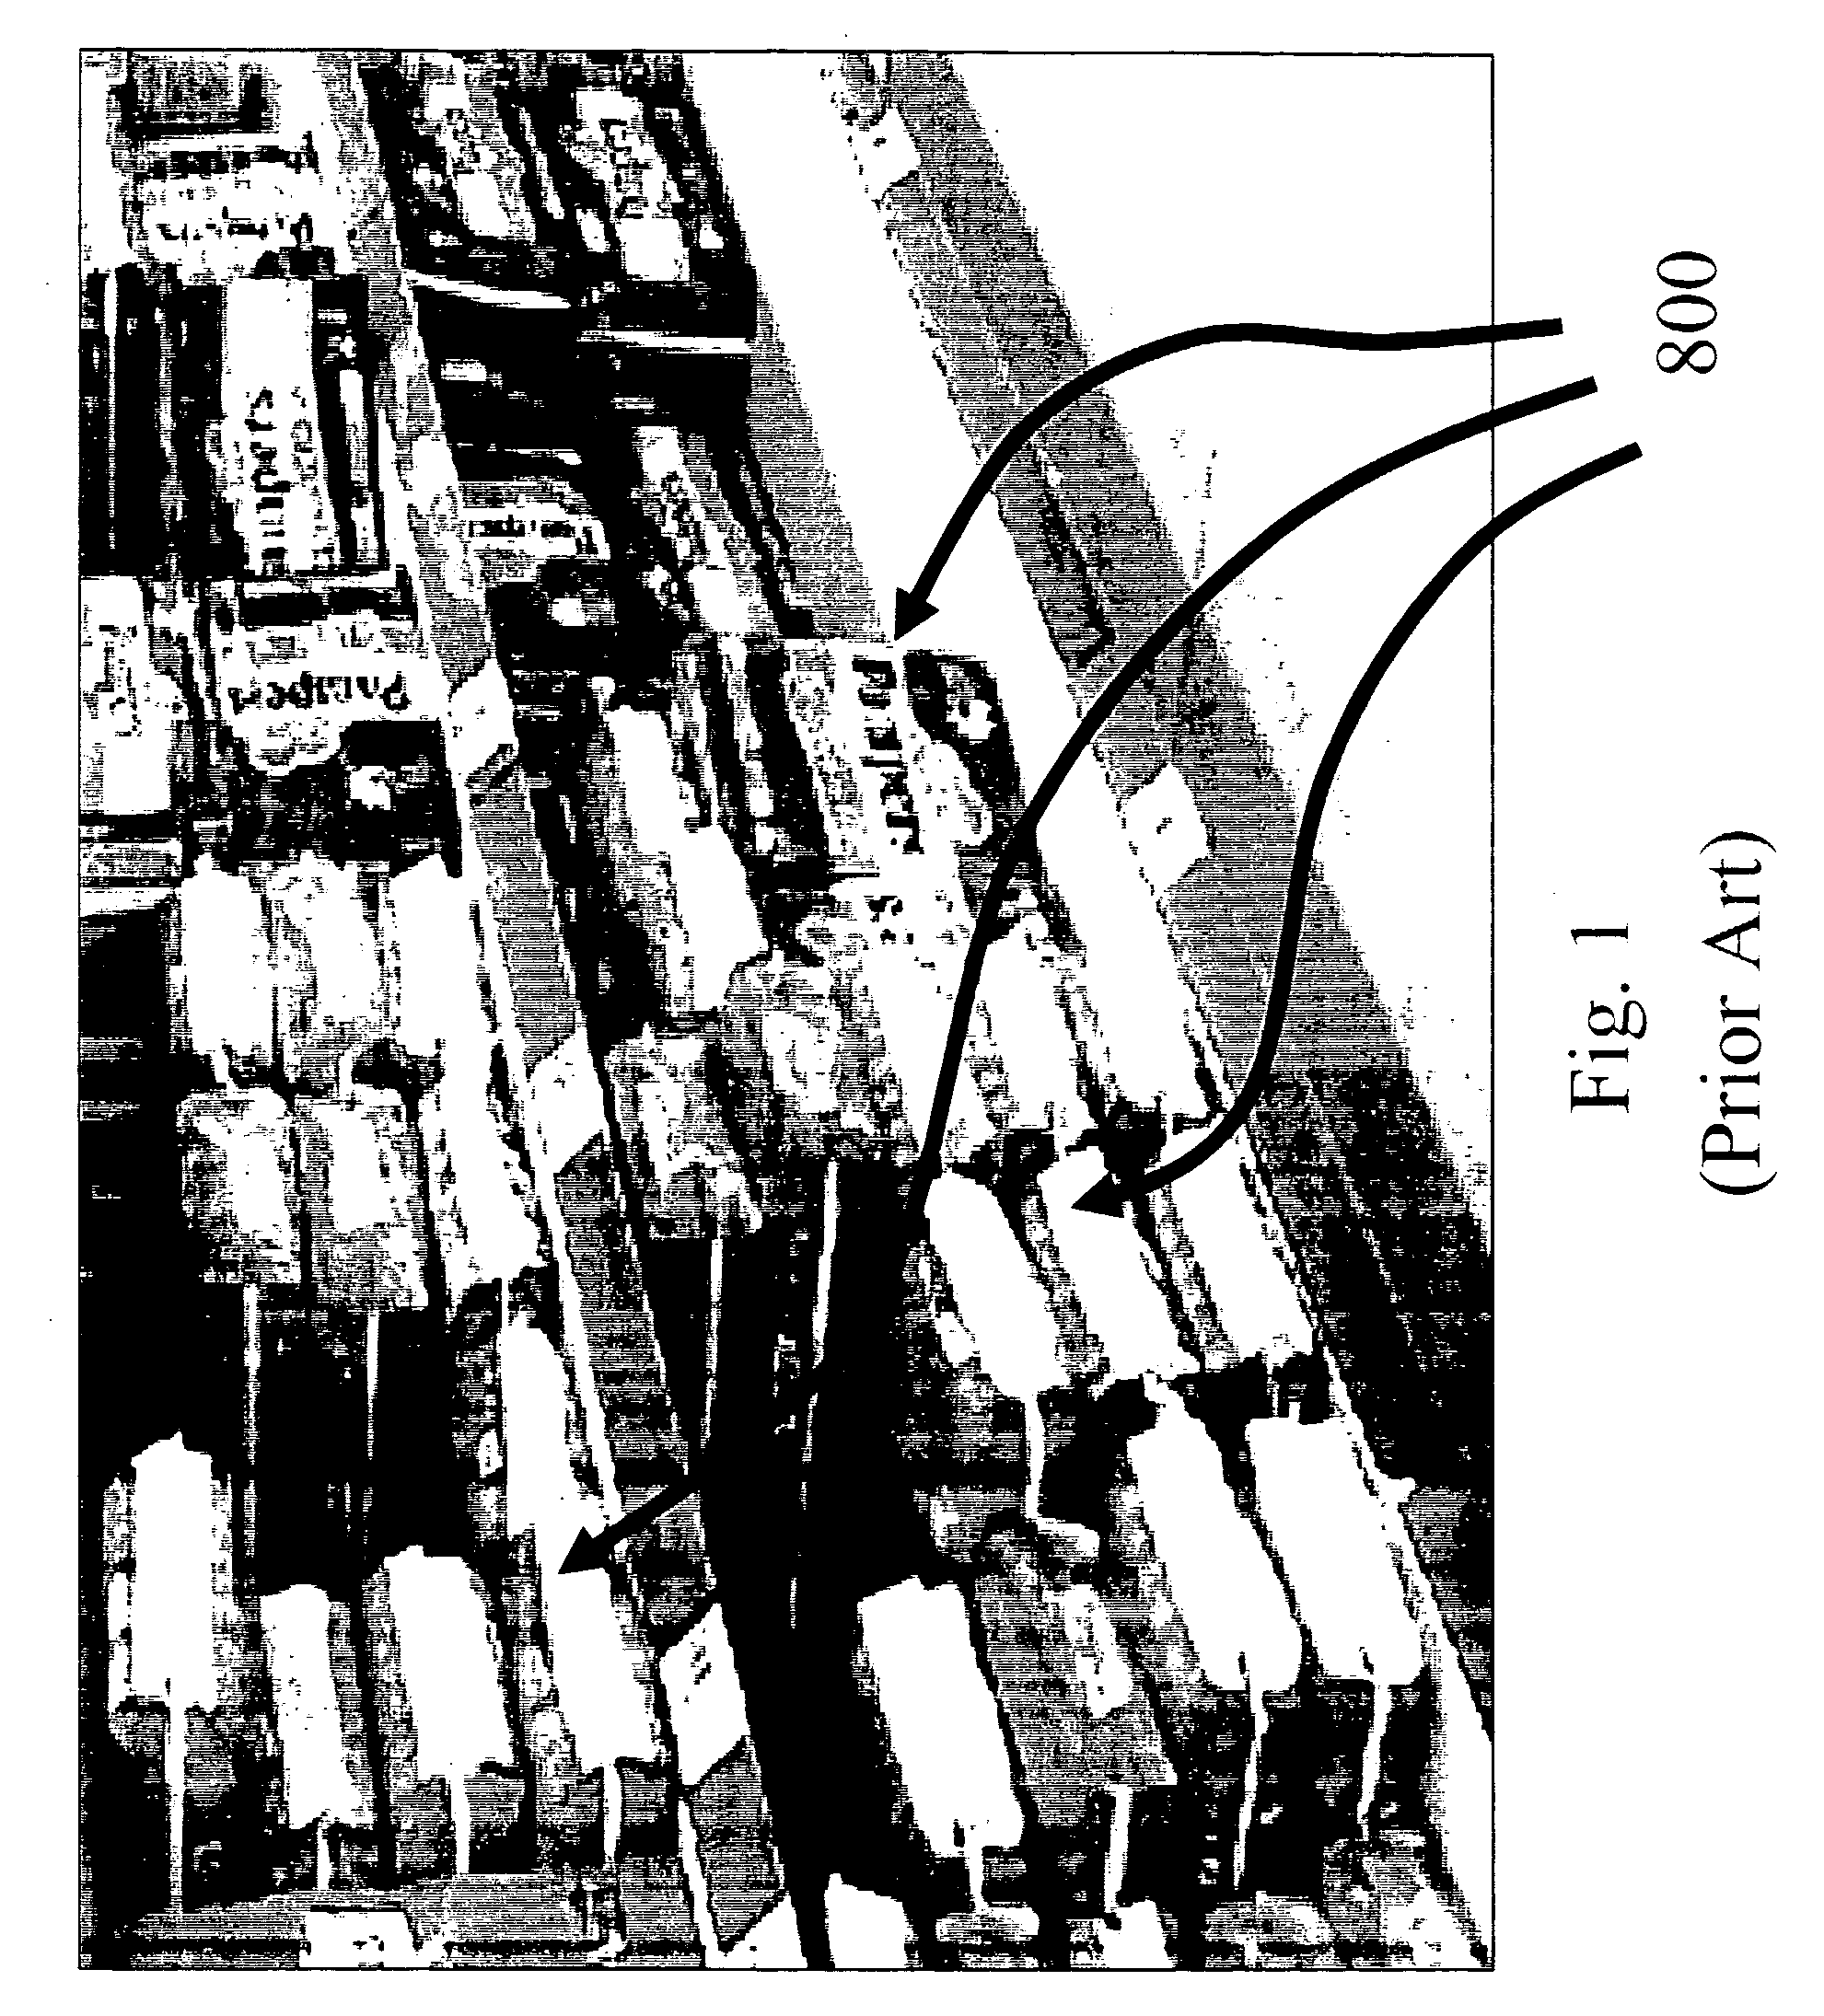 Shelf display apparatus for absorbent articles packaged in flexible film